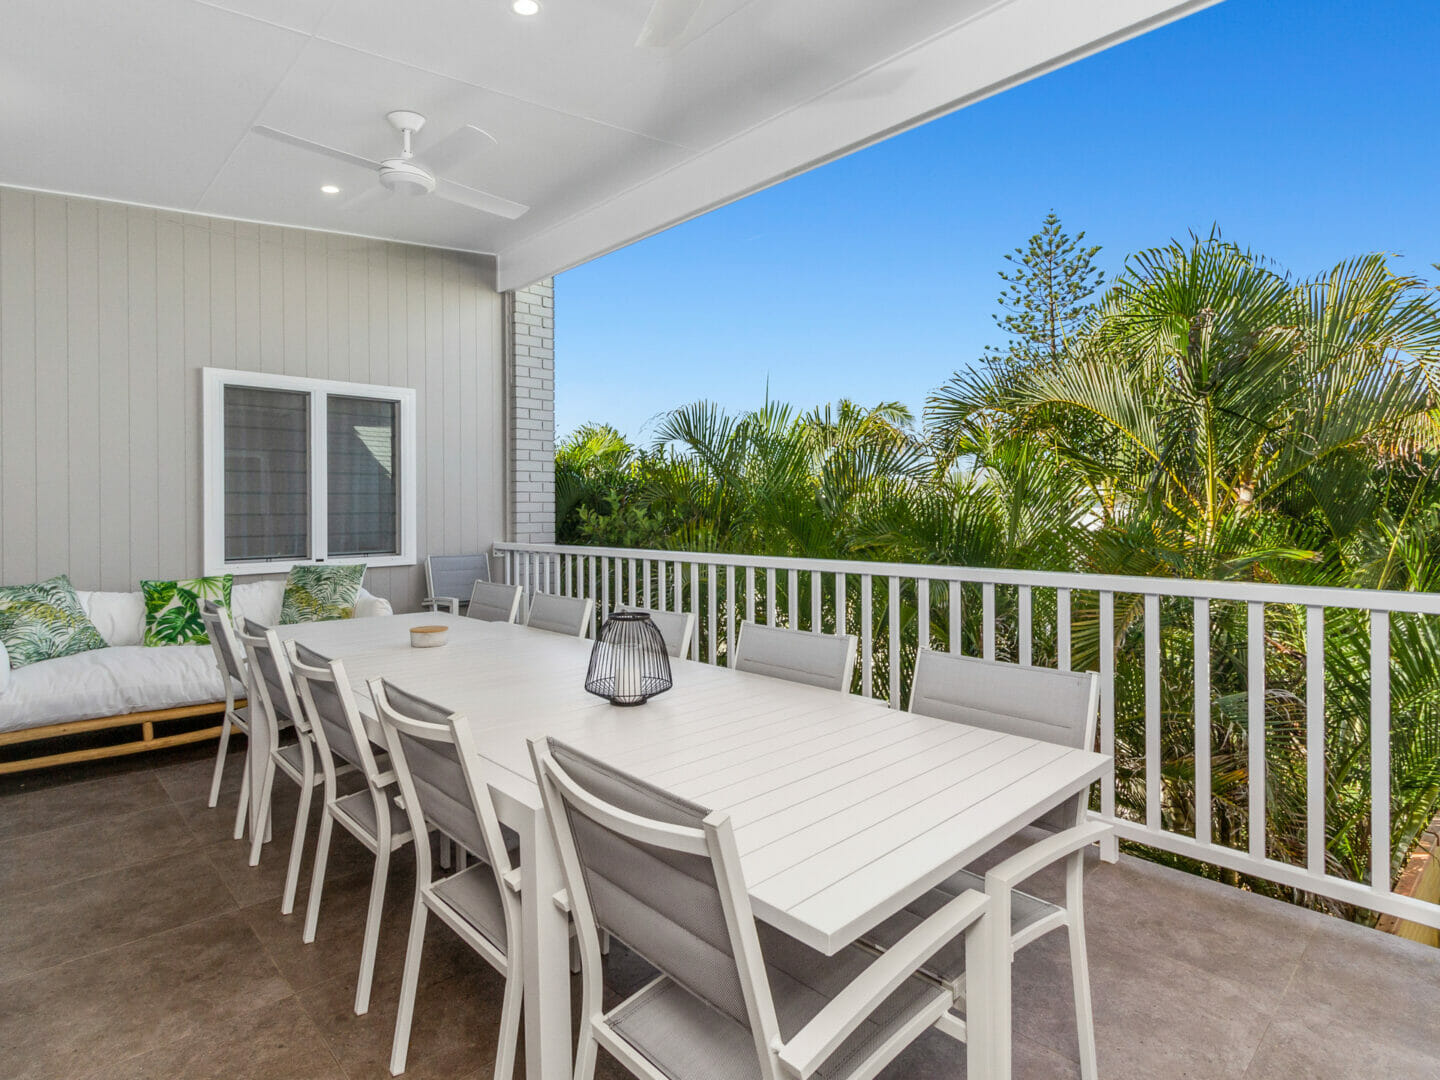 035 open2view id565821 162 marine parade kingscliff